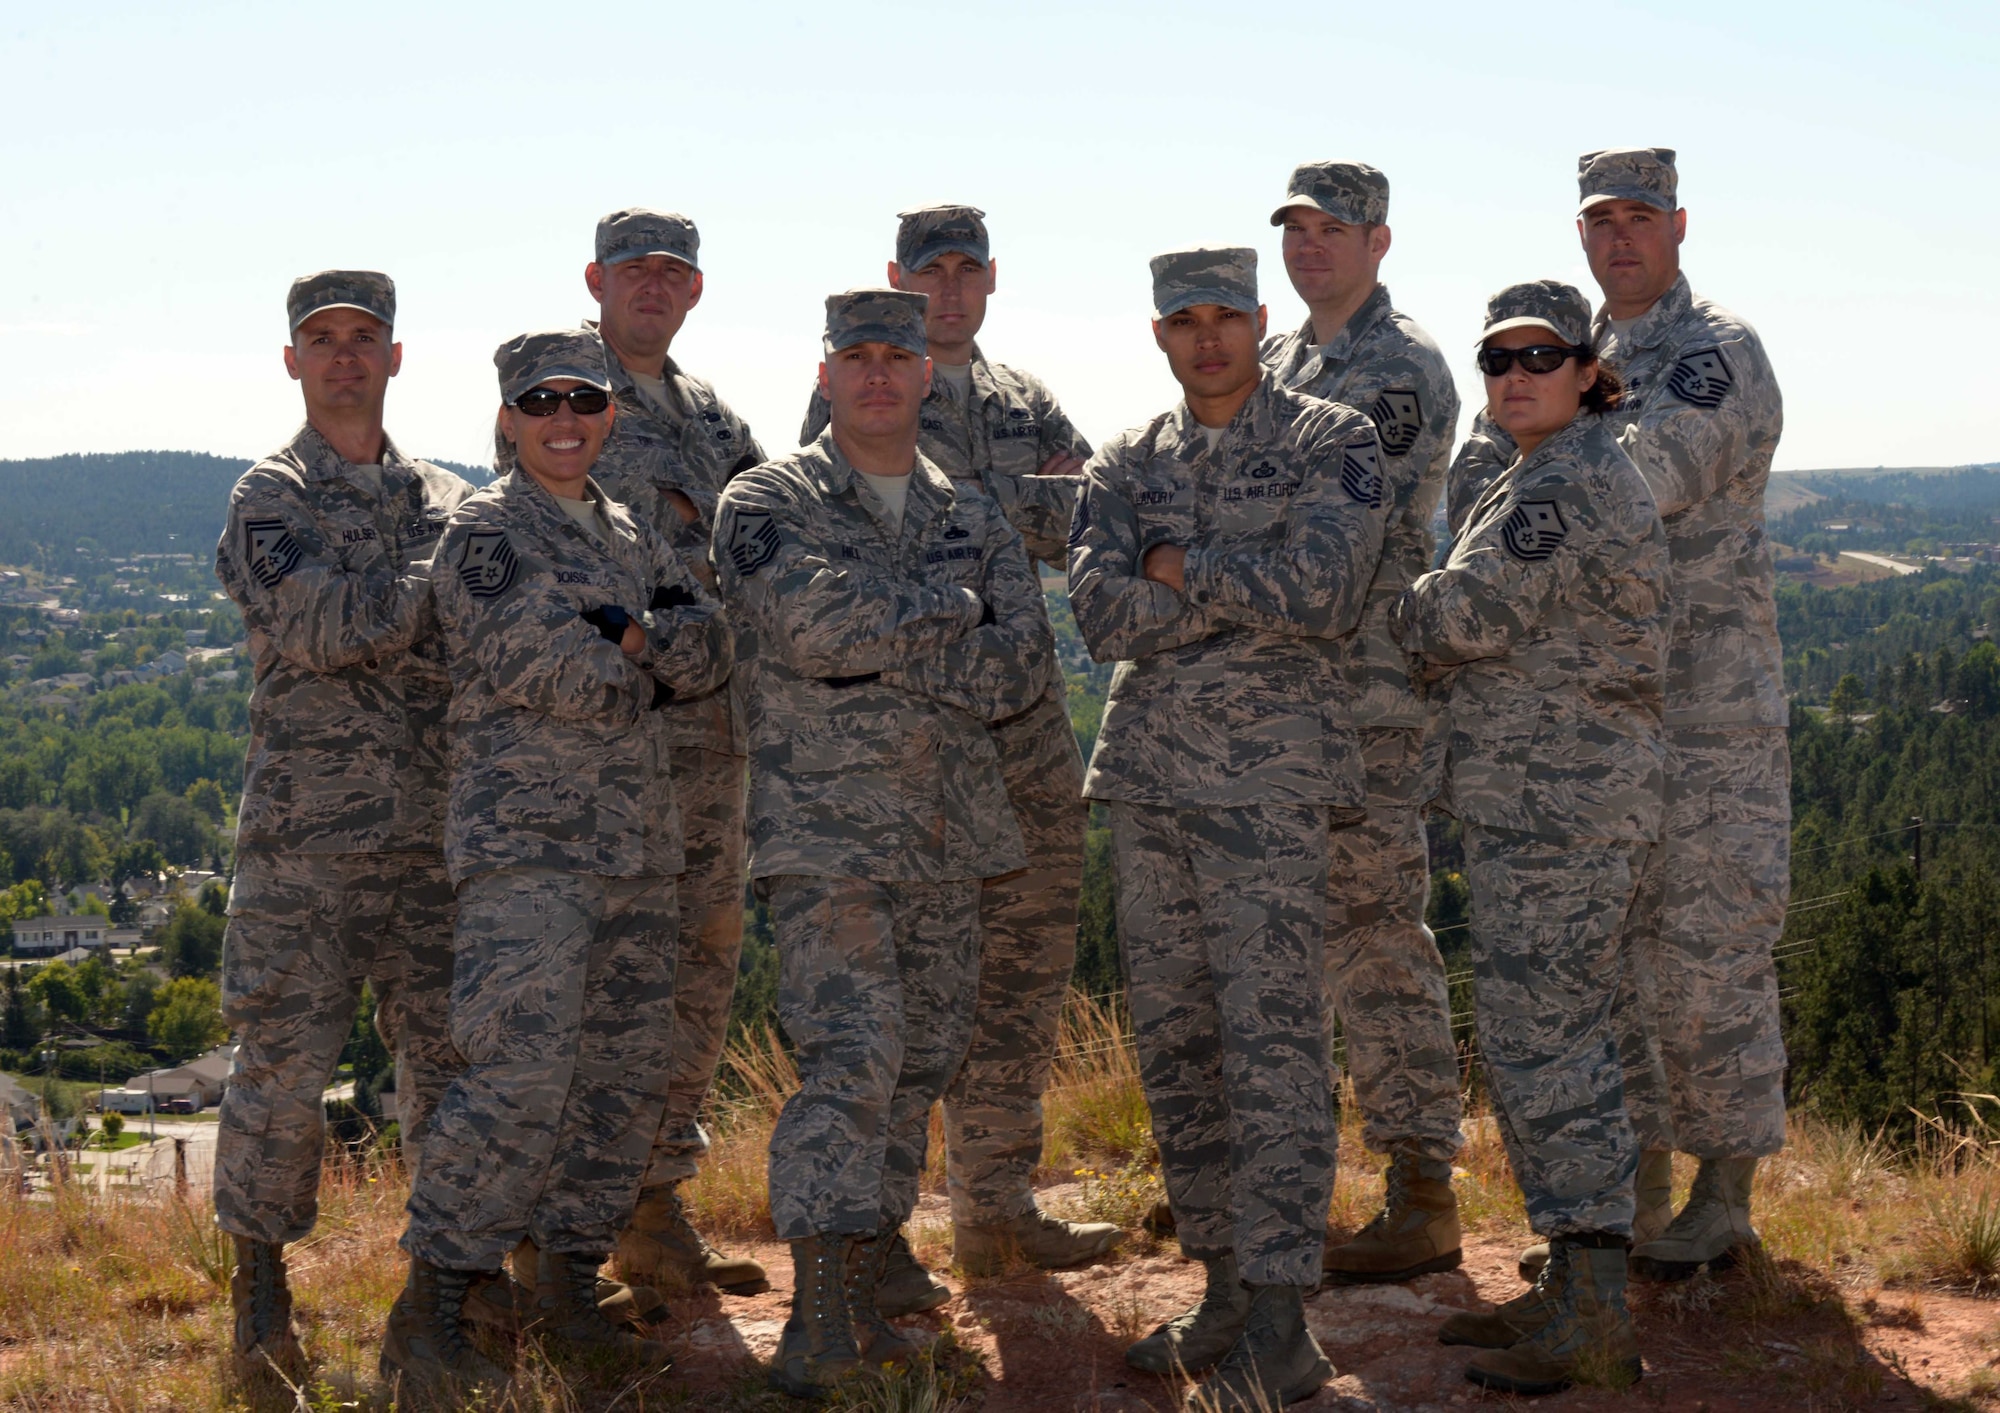 First sergeants from Ellsworth Air Force Base, S.D., pose for a group photo at the South Dakota National Guard West Camp Rapid training facility, Rapid City, Sept. 15, 2016. The group participated in a team-building event which provided an opportunity for Ellsworth’s first sergeants to grow as a team. (U.S. Air Force photo by Airman 1st Class Donald C. Knechtel)